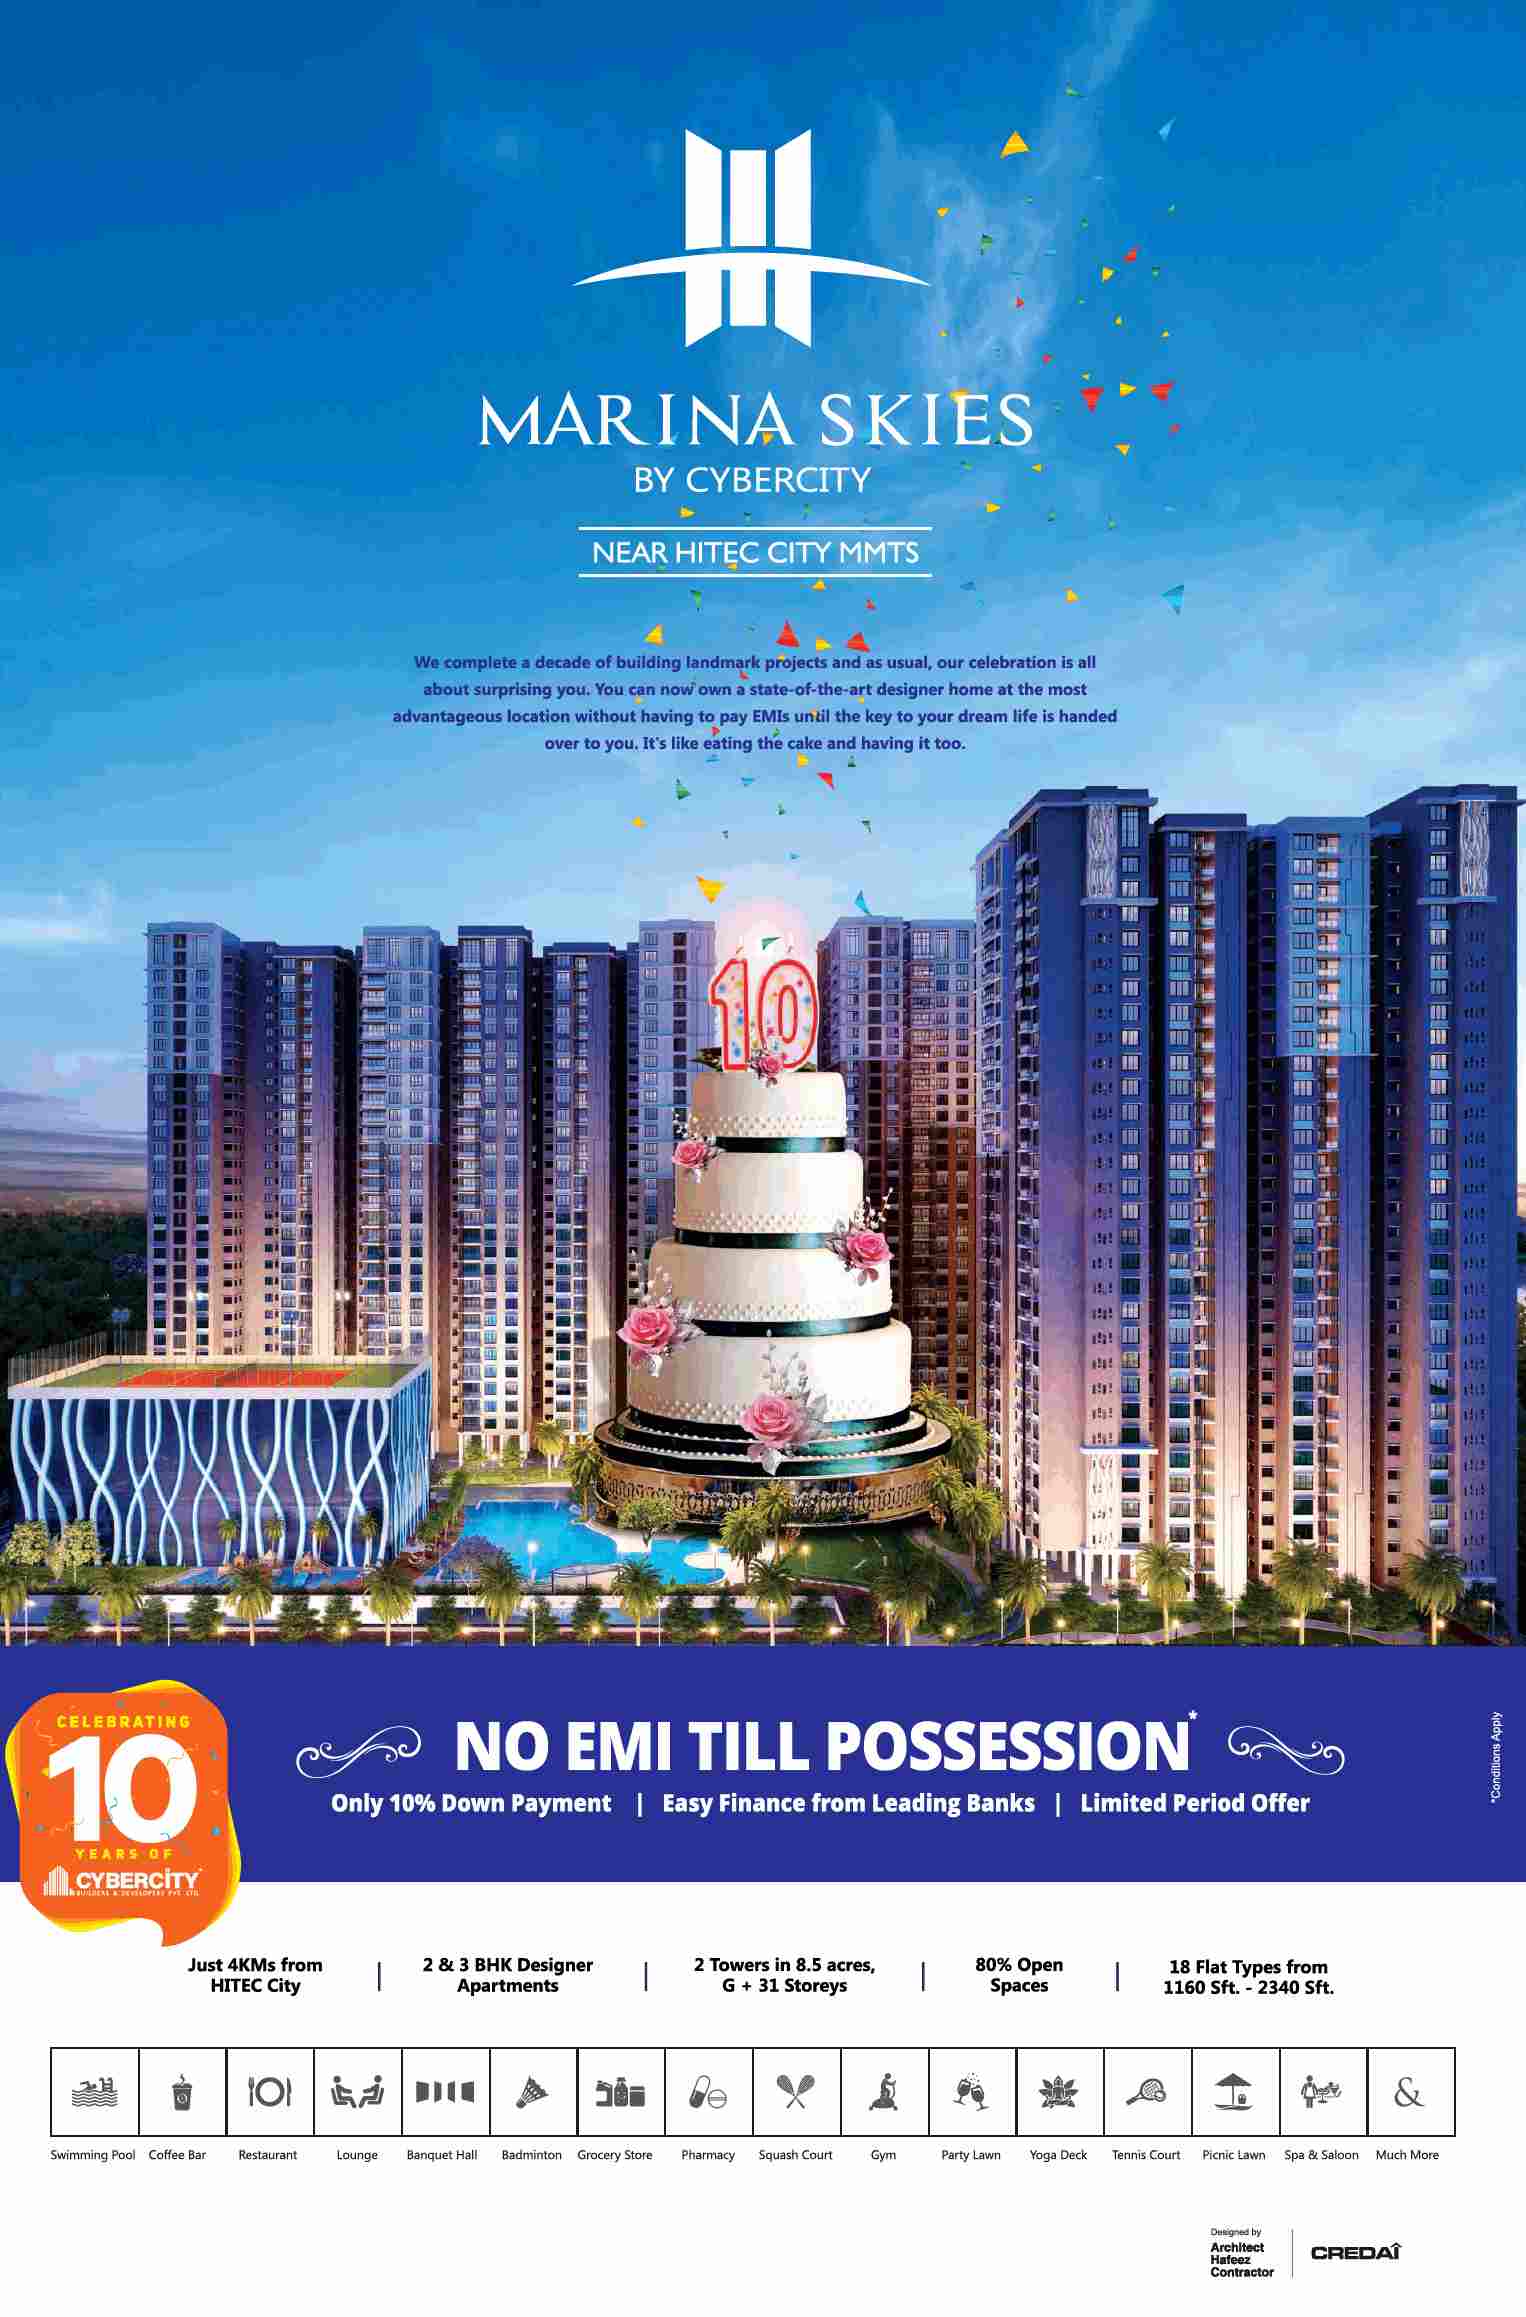 Pay 10% down payment & no EMI till possession at Cybercity Marina Skies in Hyderabad Update